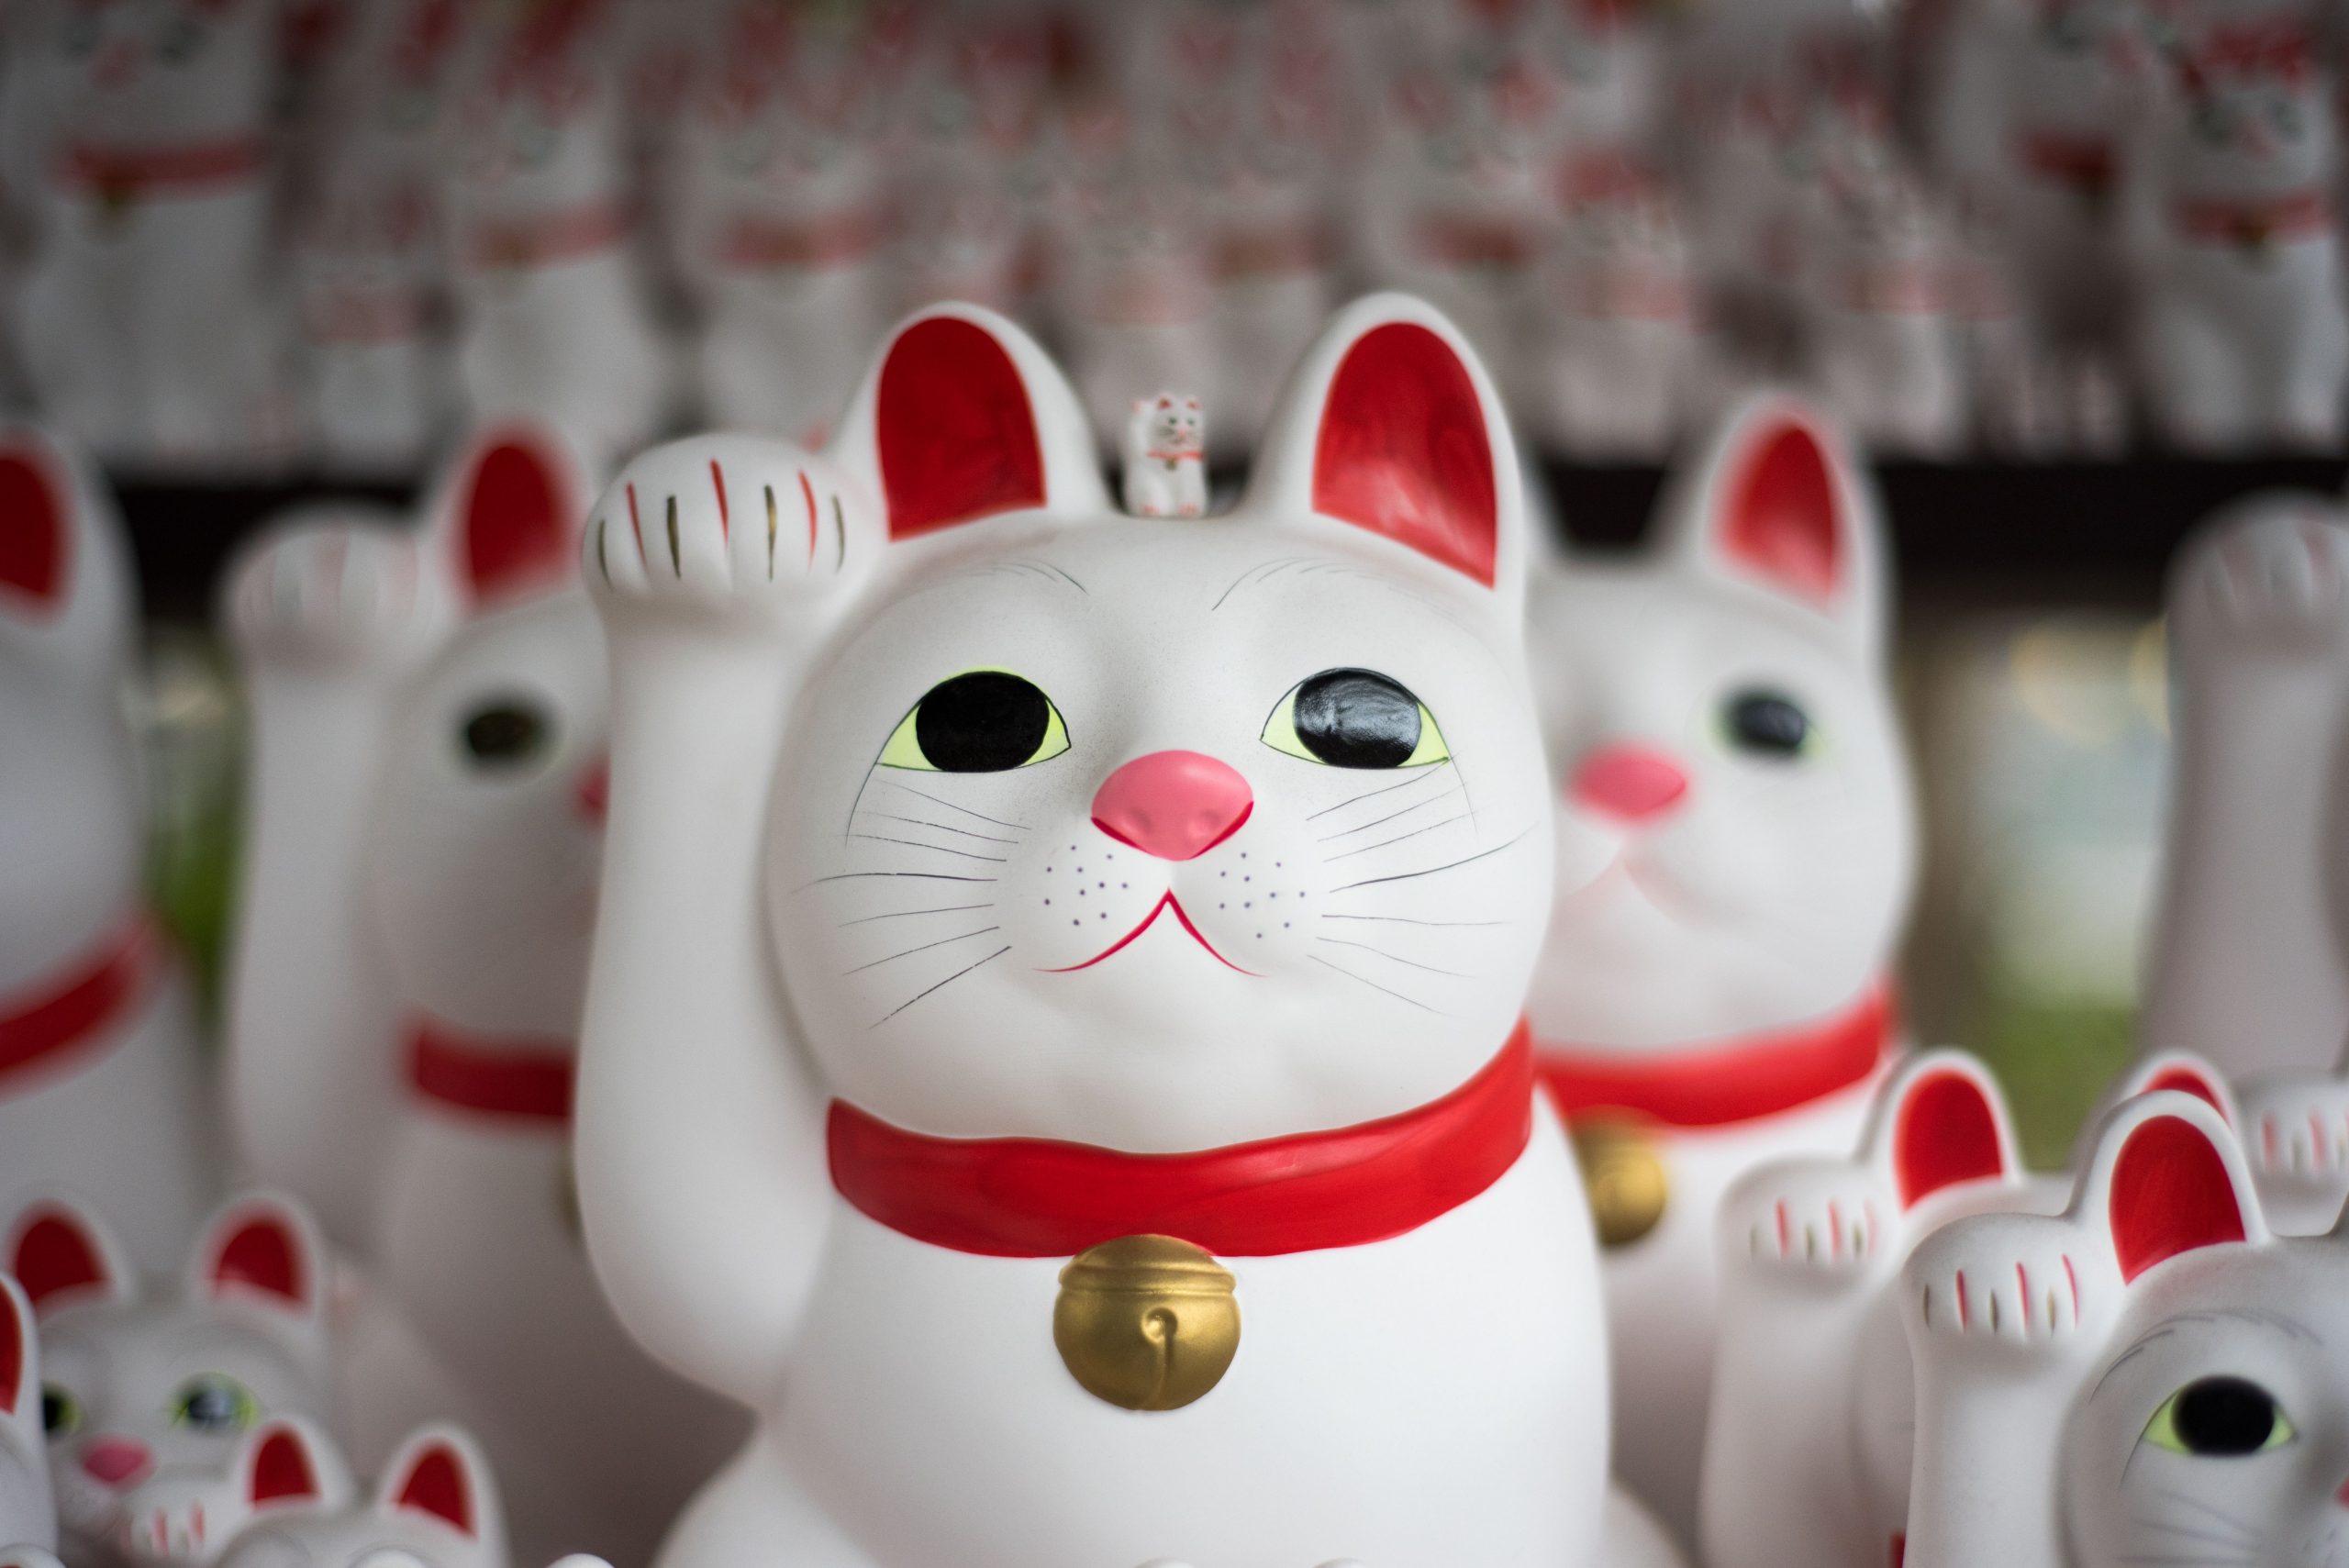 The lucky cat is one of the best souvenirs from Japan